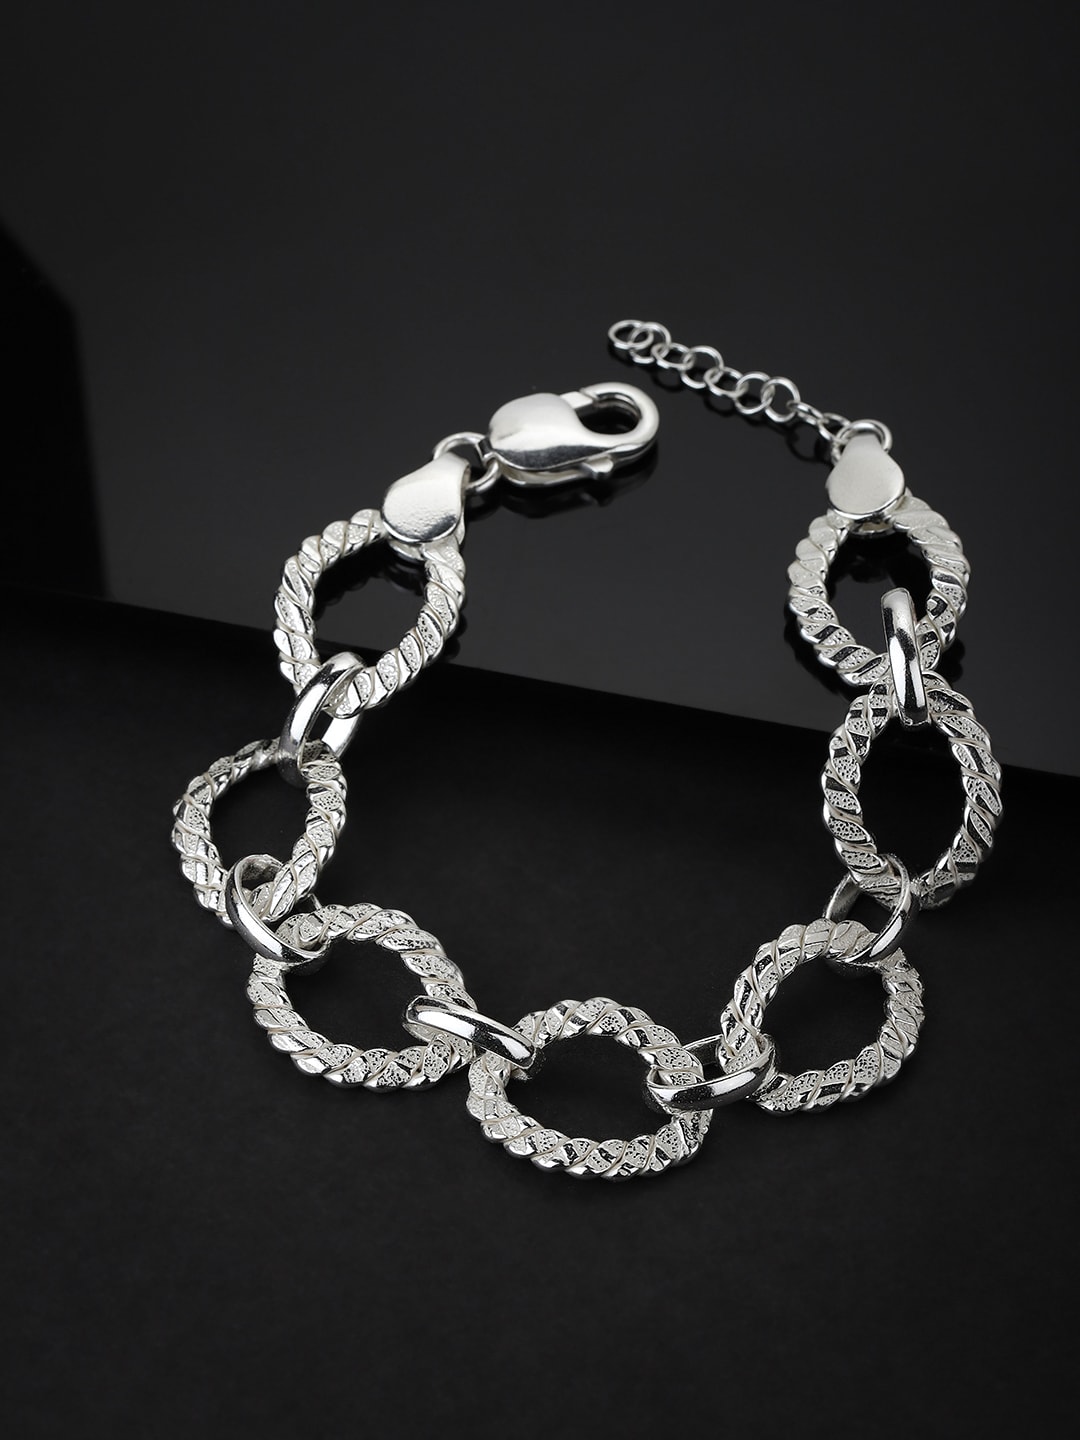 Carlton London Silver-Toned Rhodium-Plated Link Bracelet Price in India